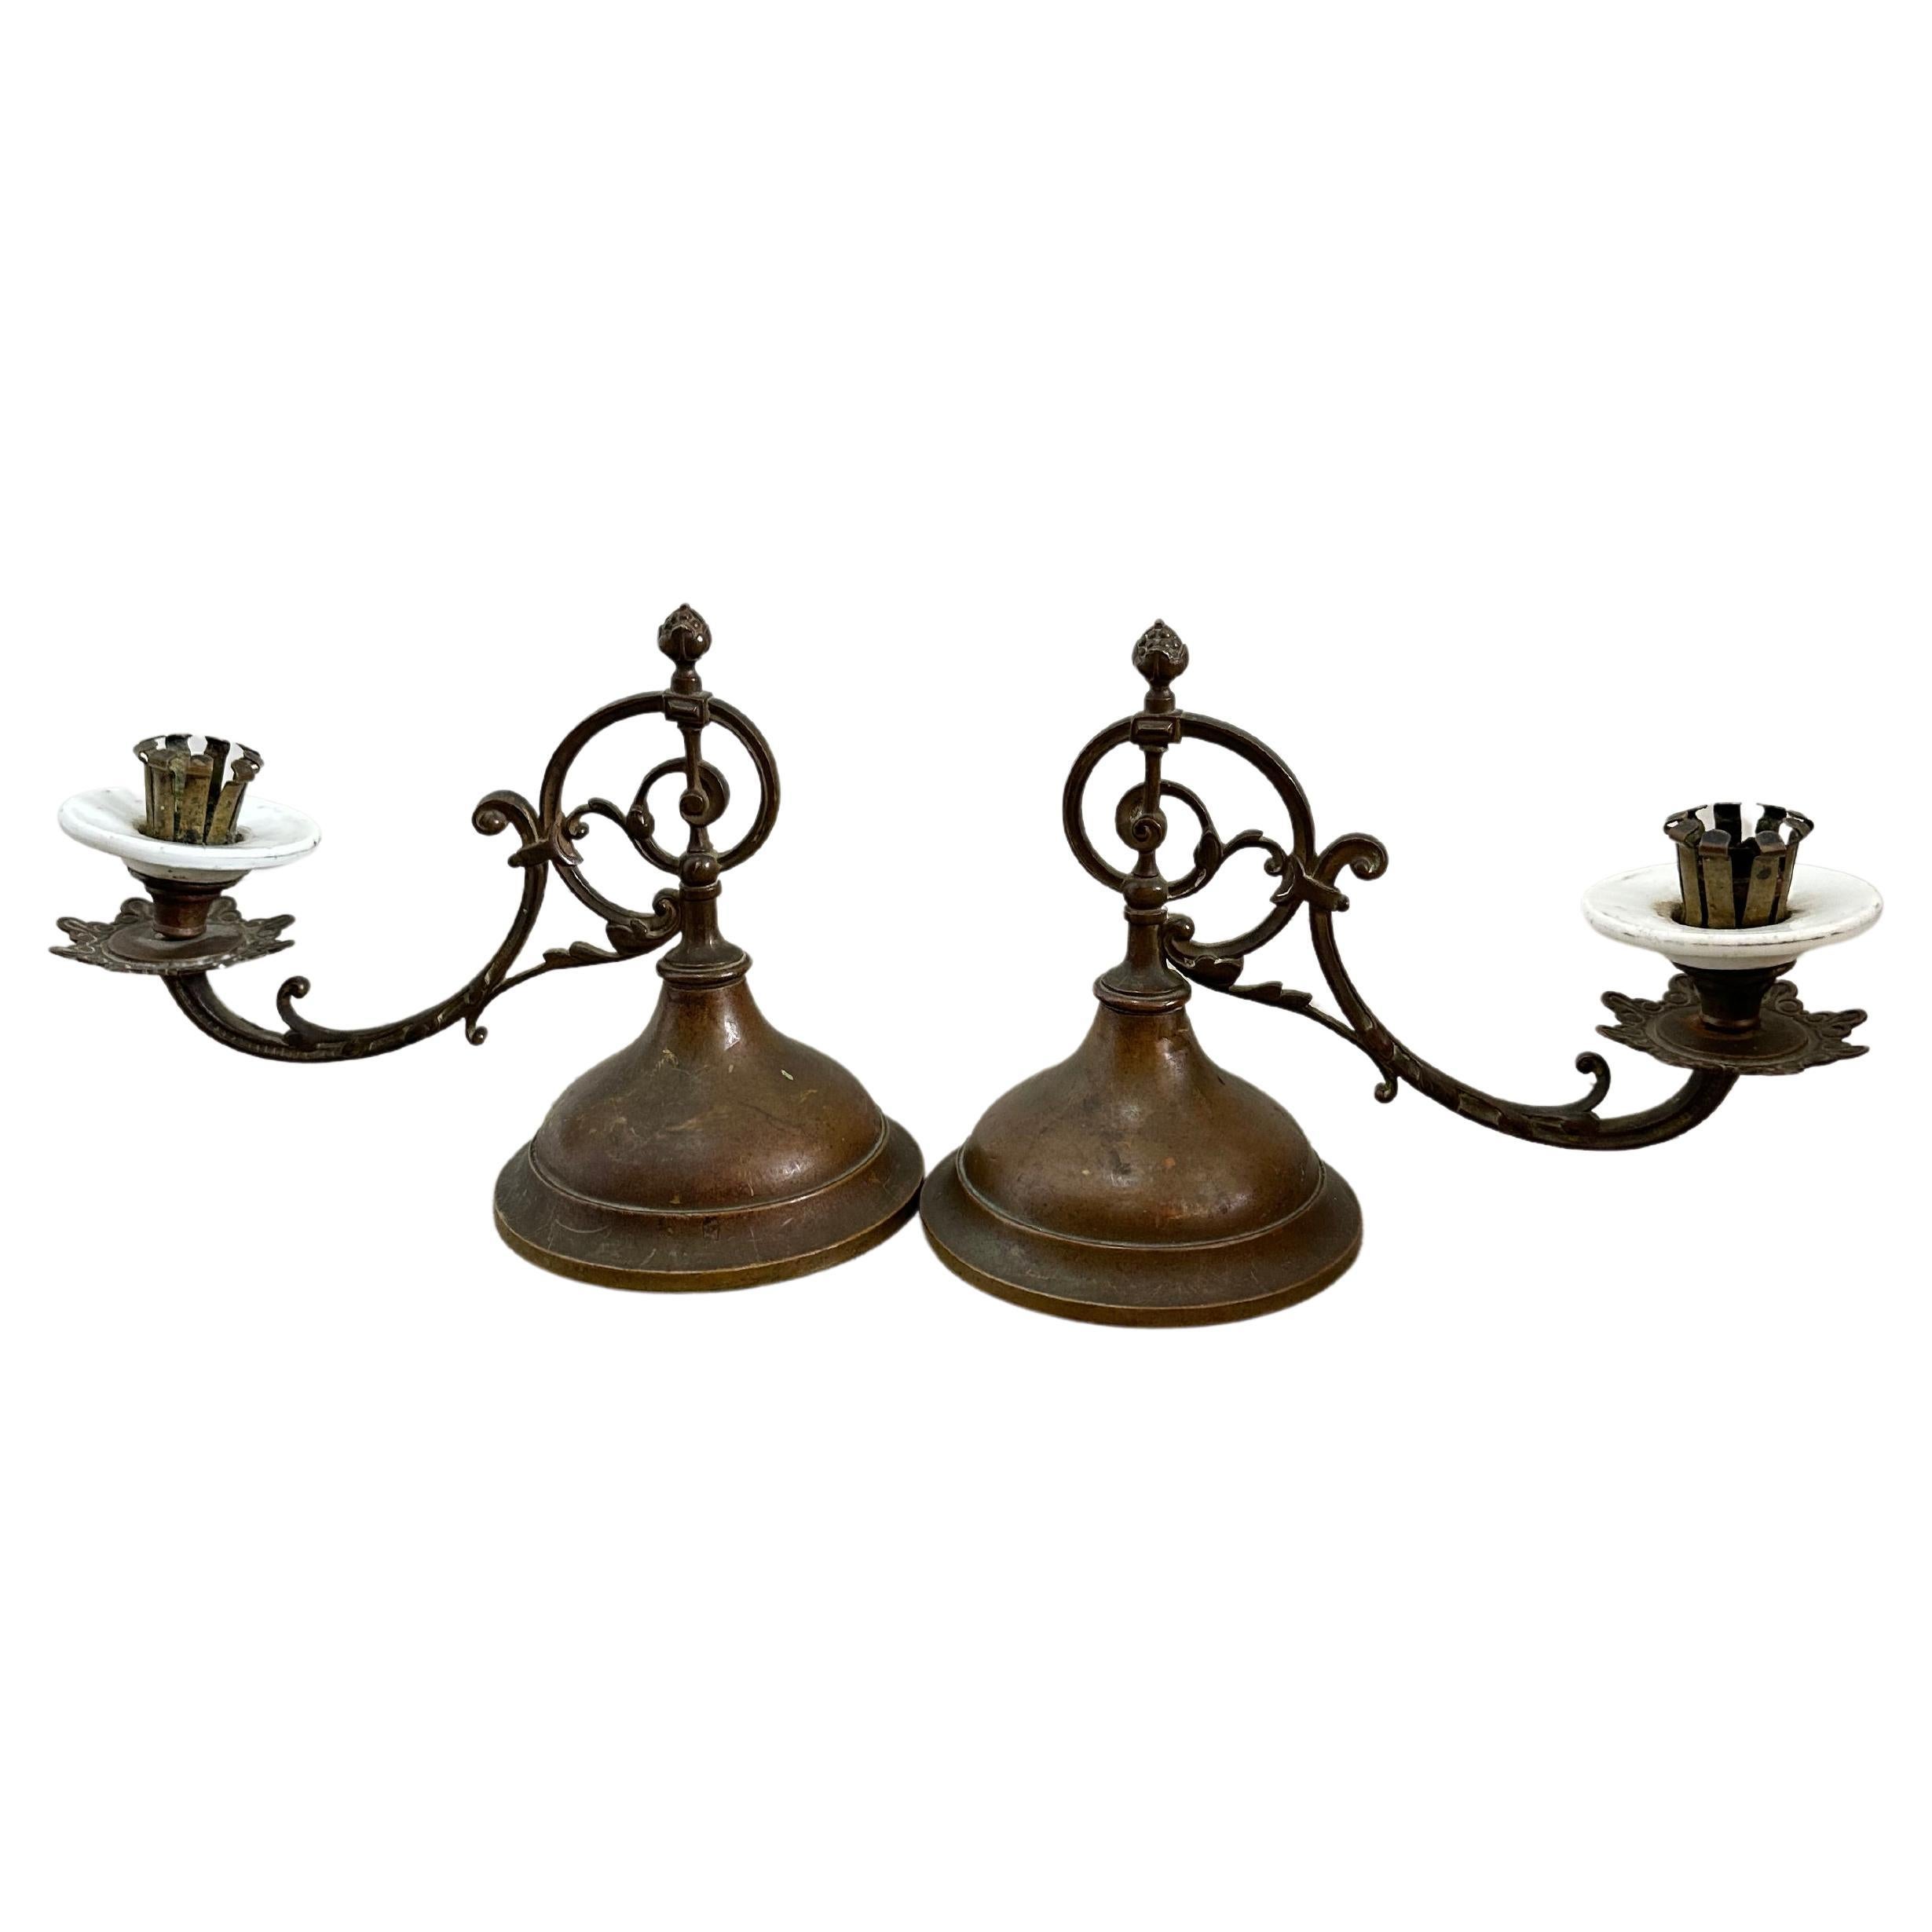 American Brass and Porcelain Turnable Candle Holders, 1800